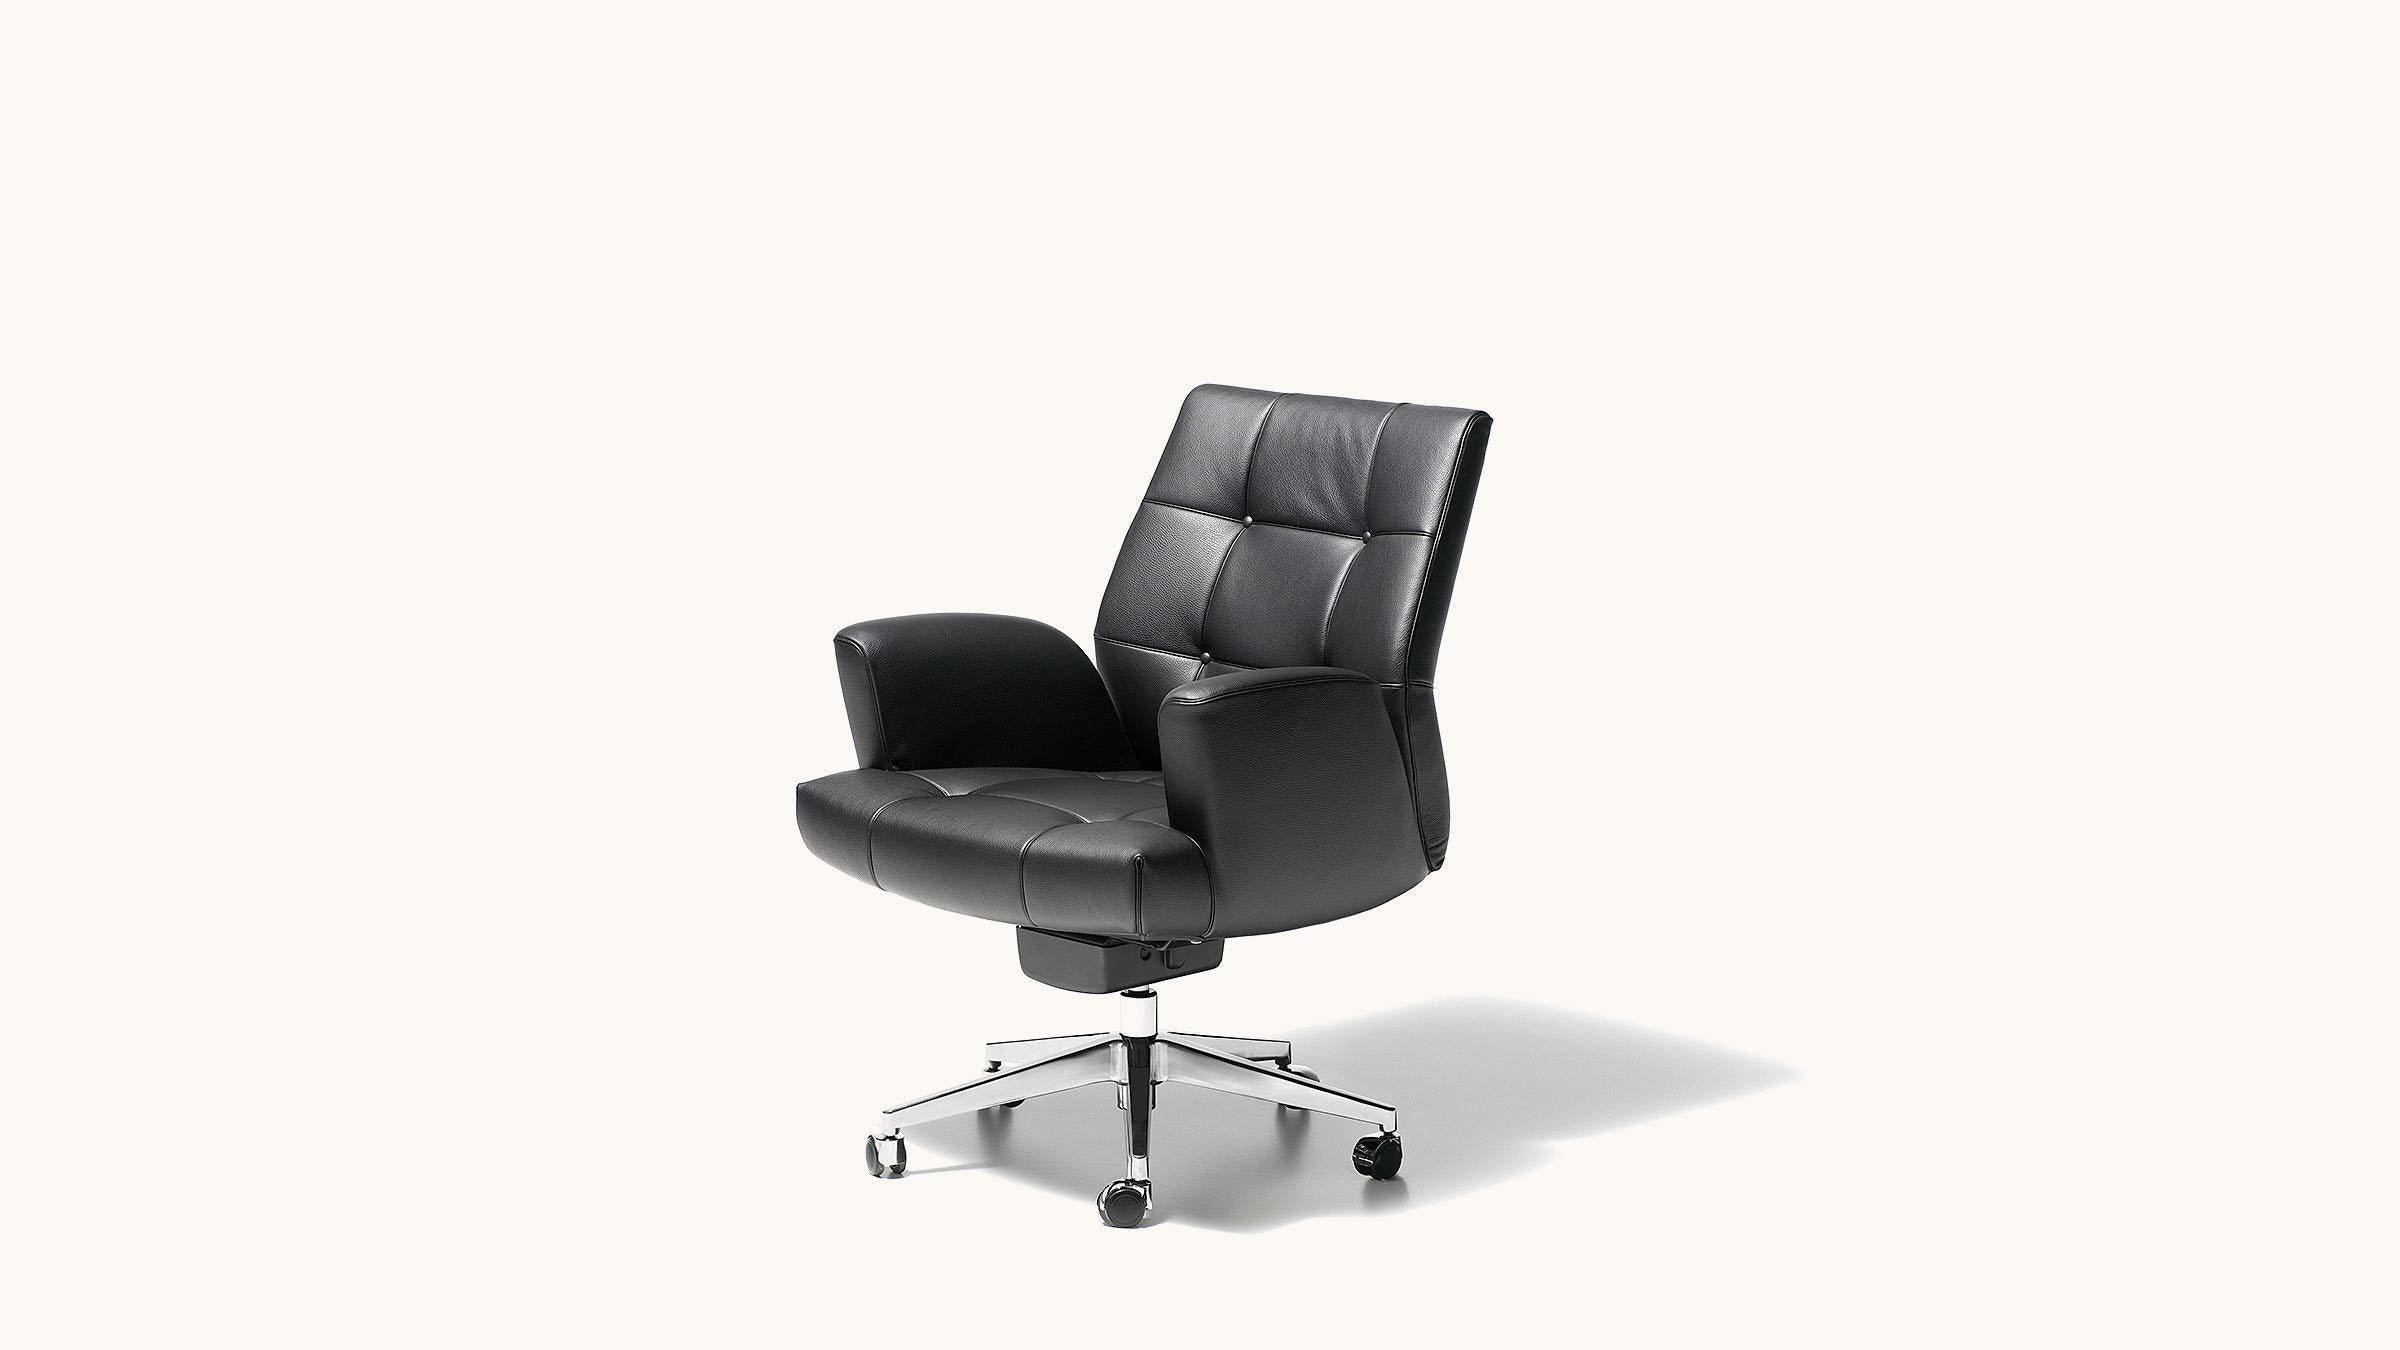 Sitting comfortably is the name of the game here! Designed as a Classic executive chair, the DS-257 is the perfect choice for concentrated and at the same time comfortable work, made for everyone with high demands during office work. Special care is